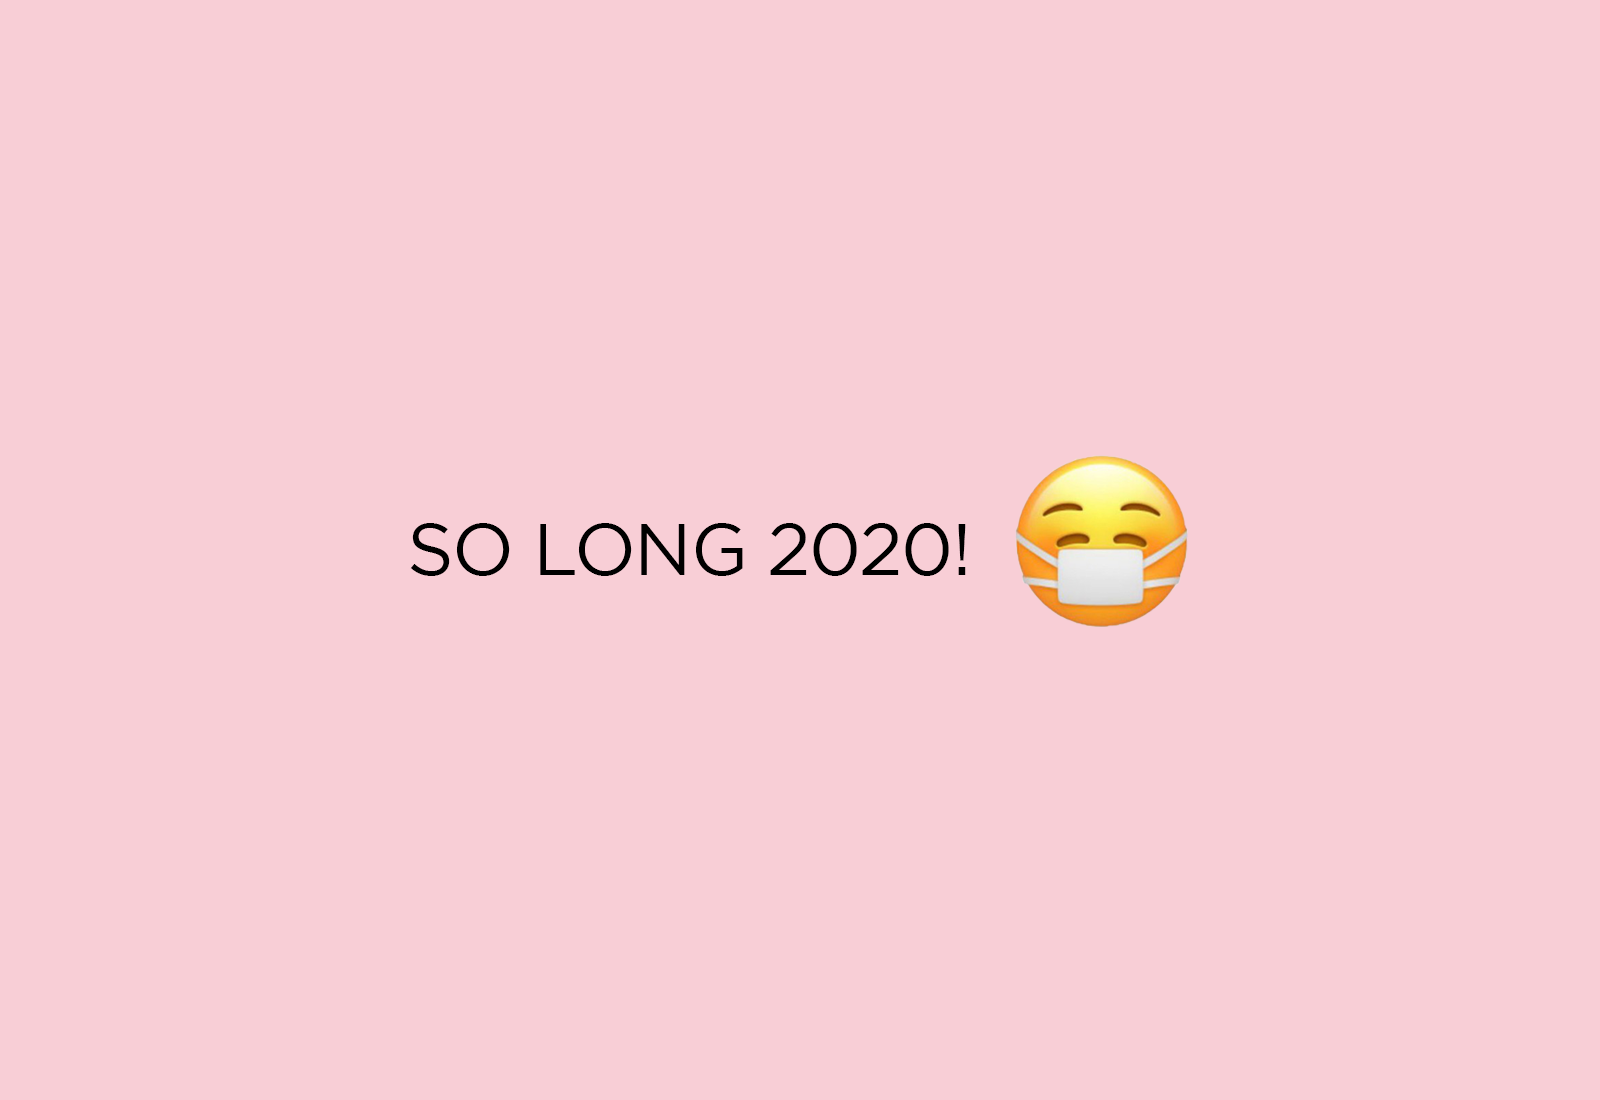 🎊 So Long 2020 🎊 It's About Time You Go